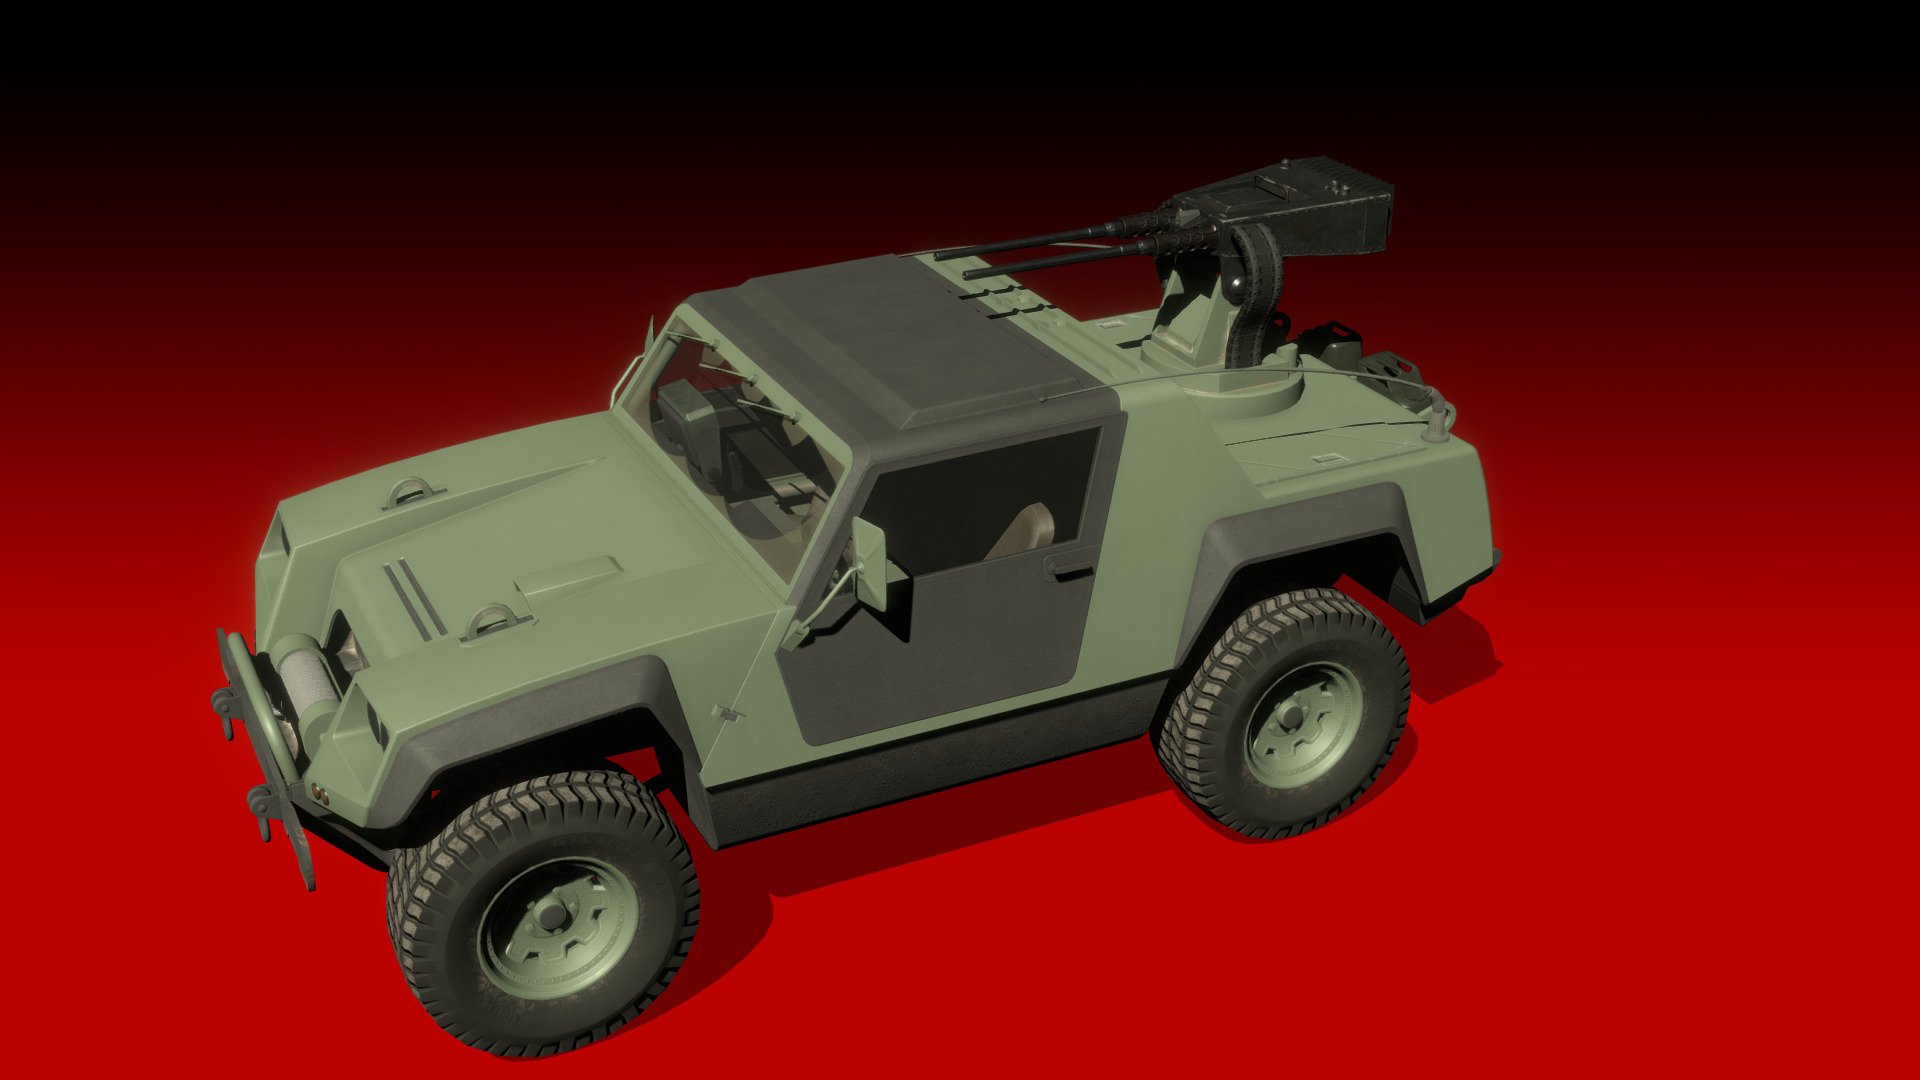 Inspired by a toy from the '80s, this vehicle has been fleshed out for a realistic representation as if one could actually operate it. Real world components and proportions are incorporated into the design to help acheive this. 

This is part of a series of vehicles and assets that can be used in &ldquo;Fight for Freedom!